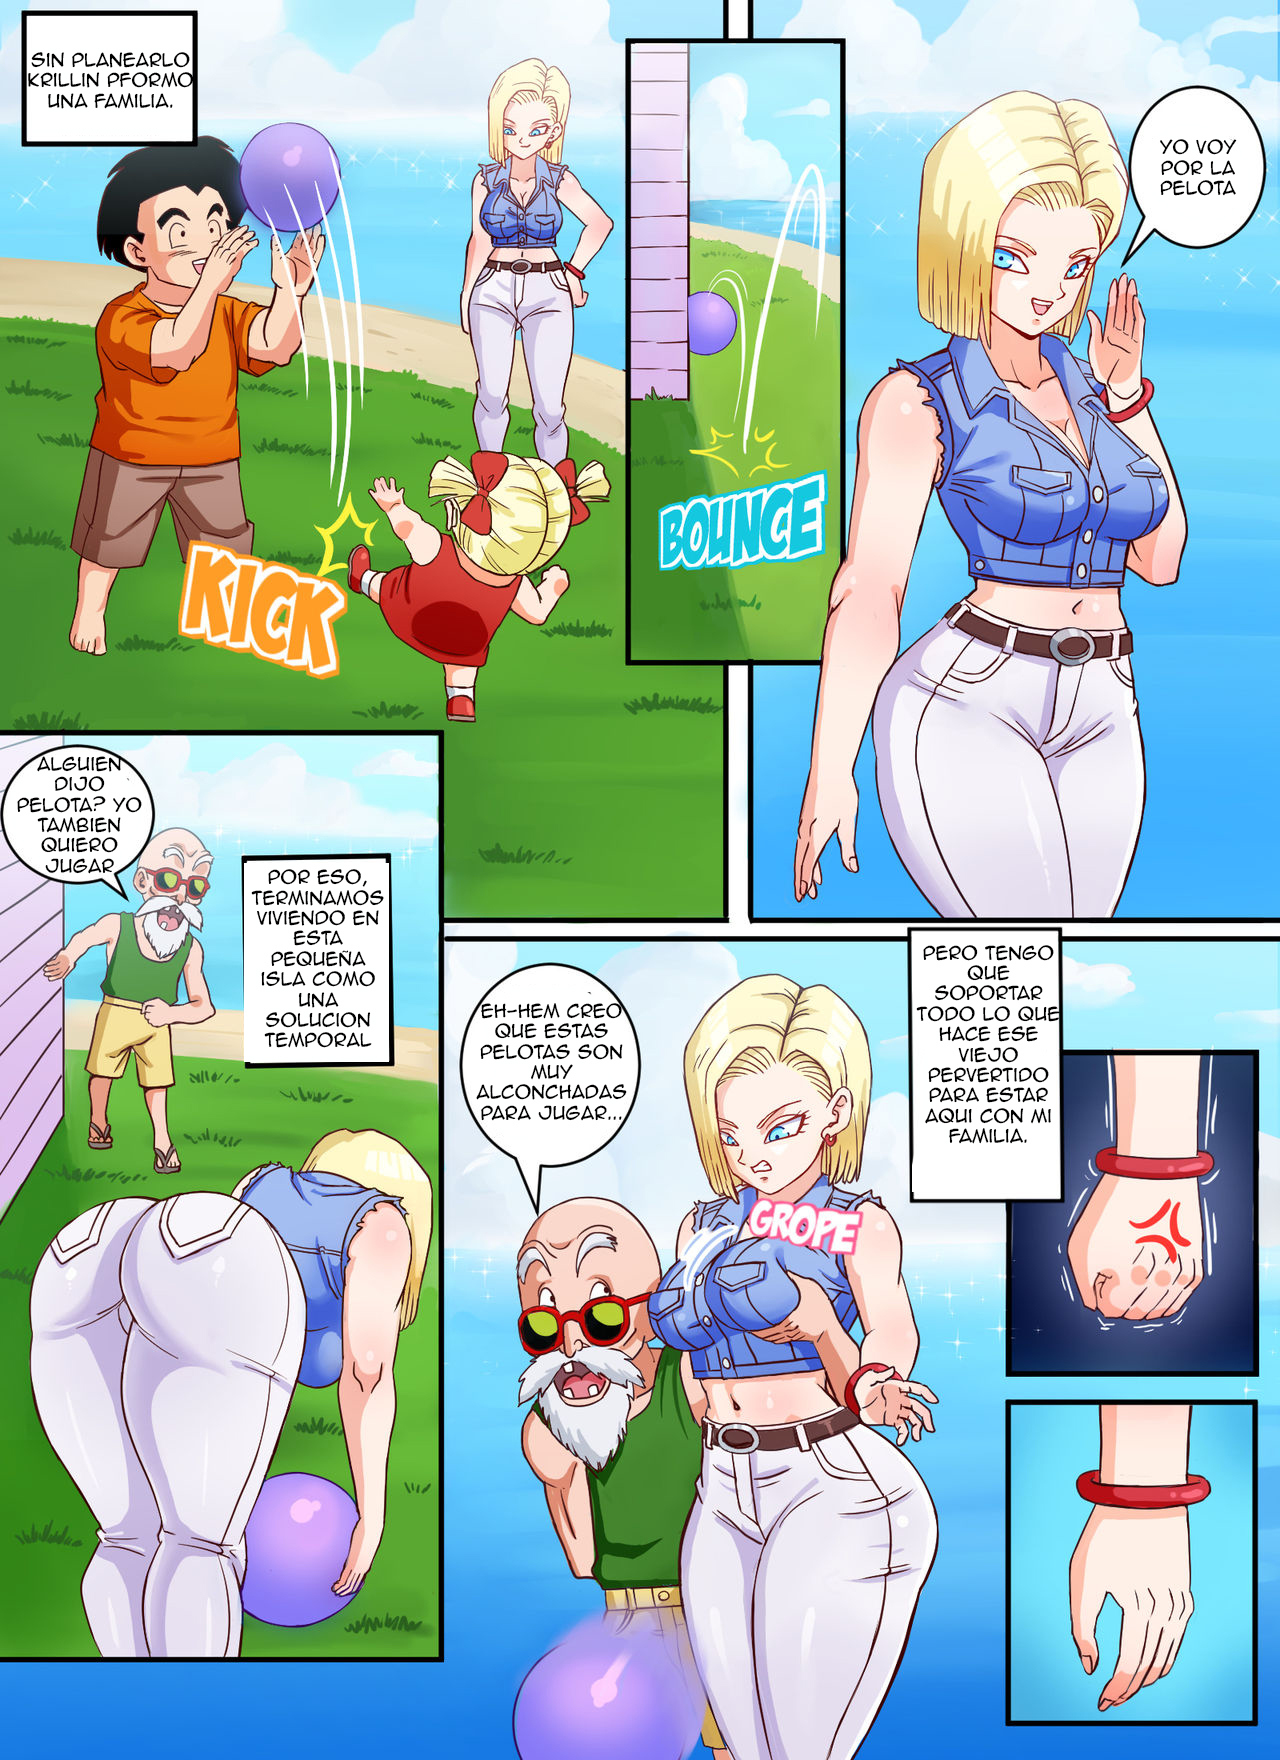 Android 18 x Roshi Pink Pawg 02